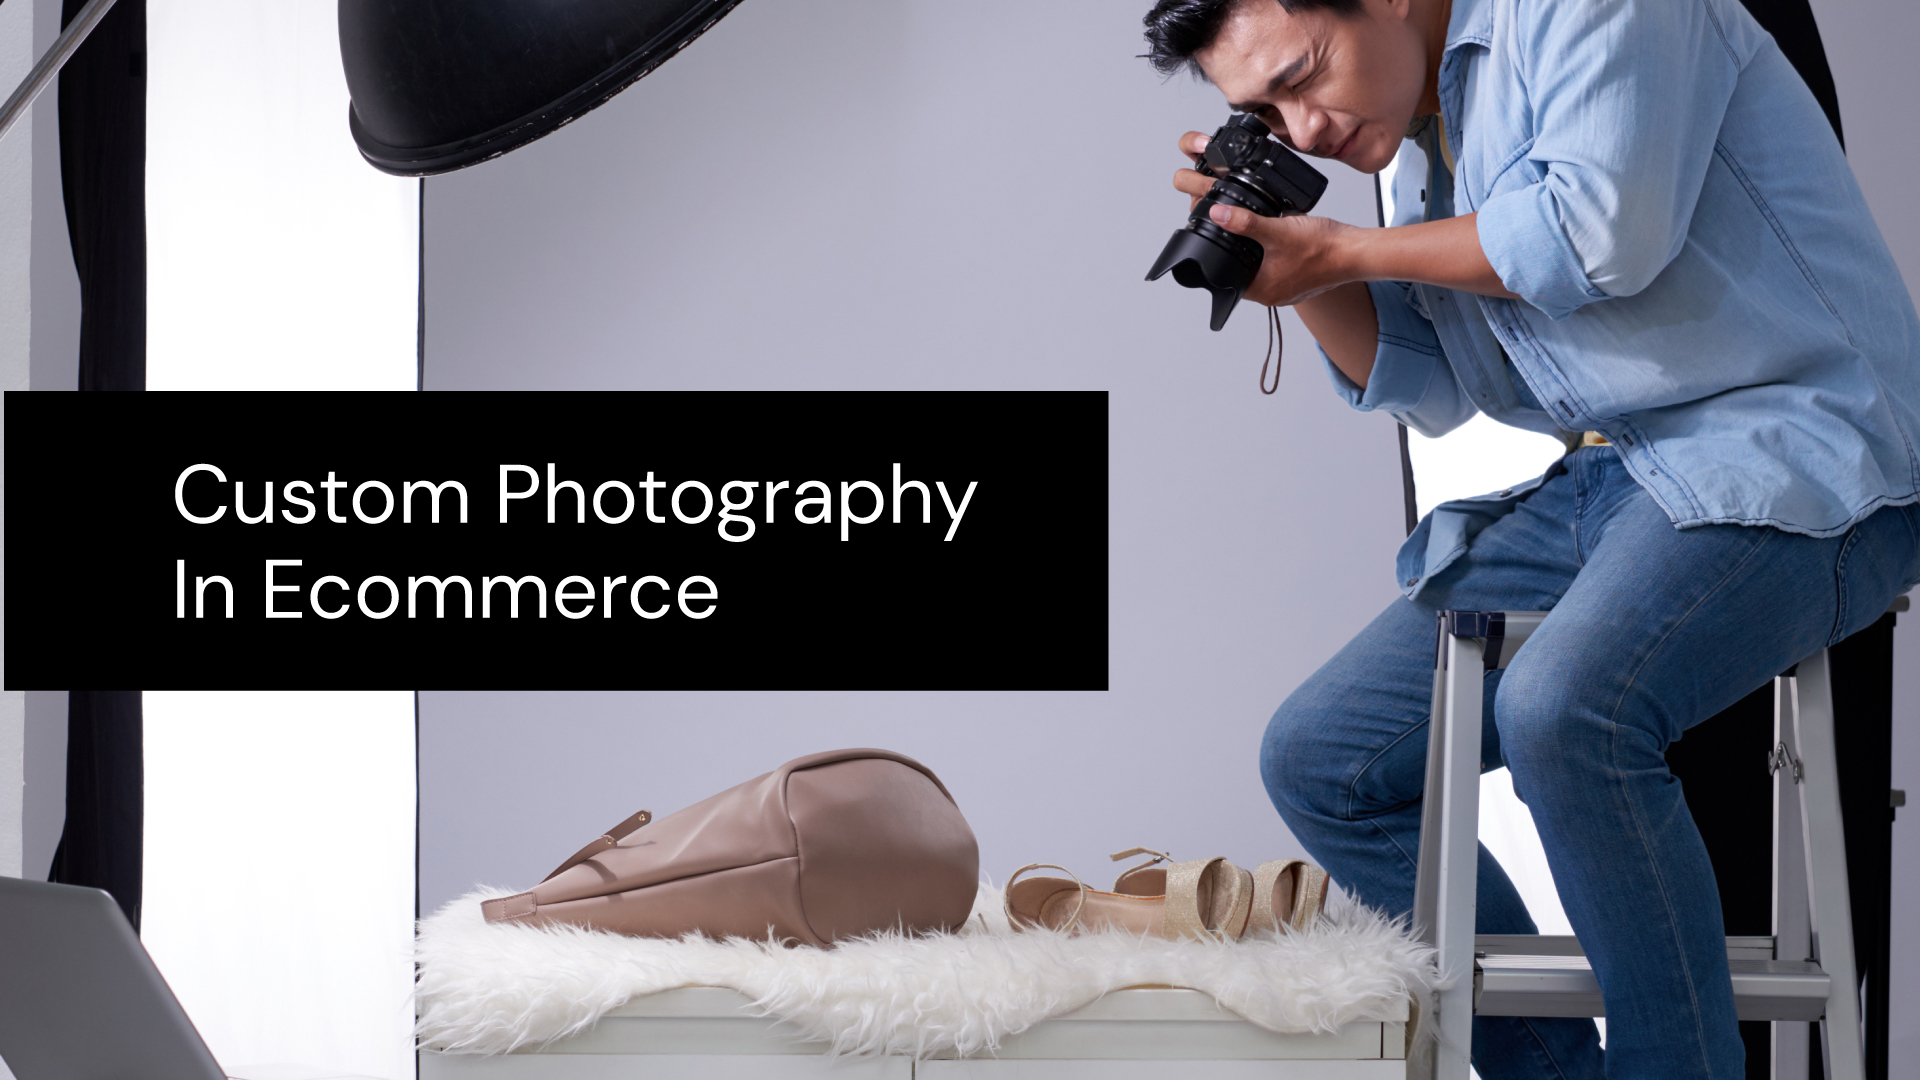 Why Custom Photography is Important For Ecommerce Sites